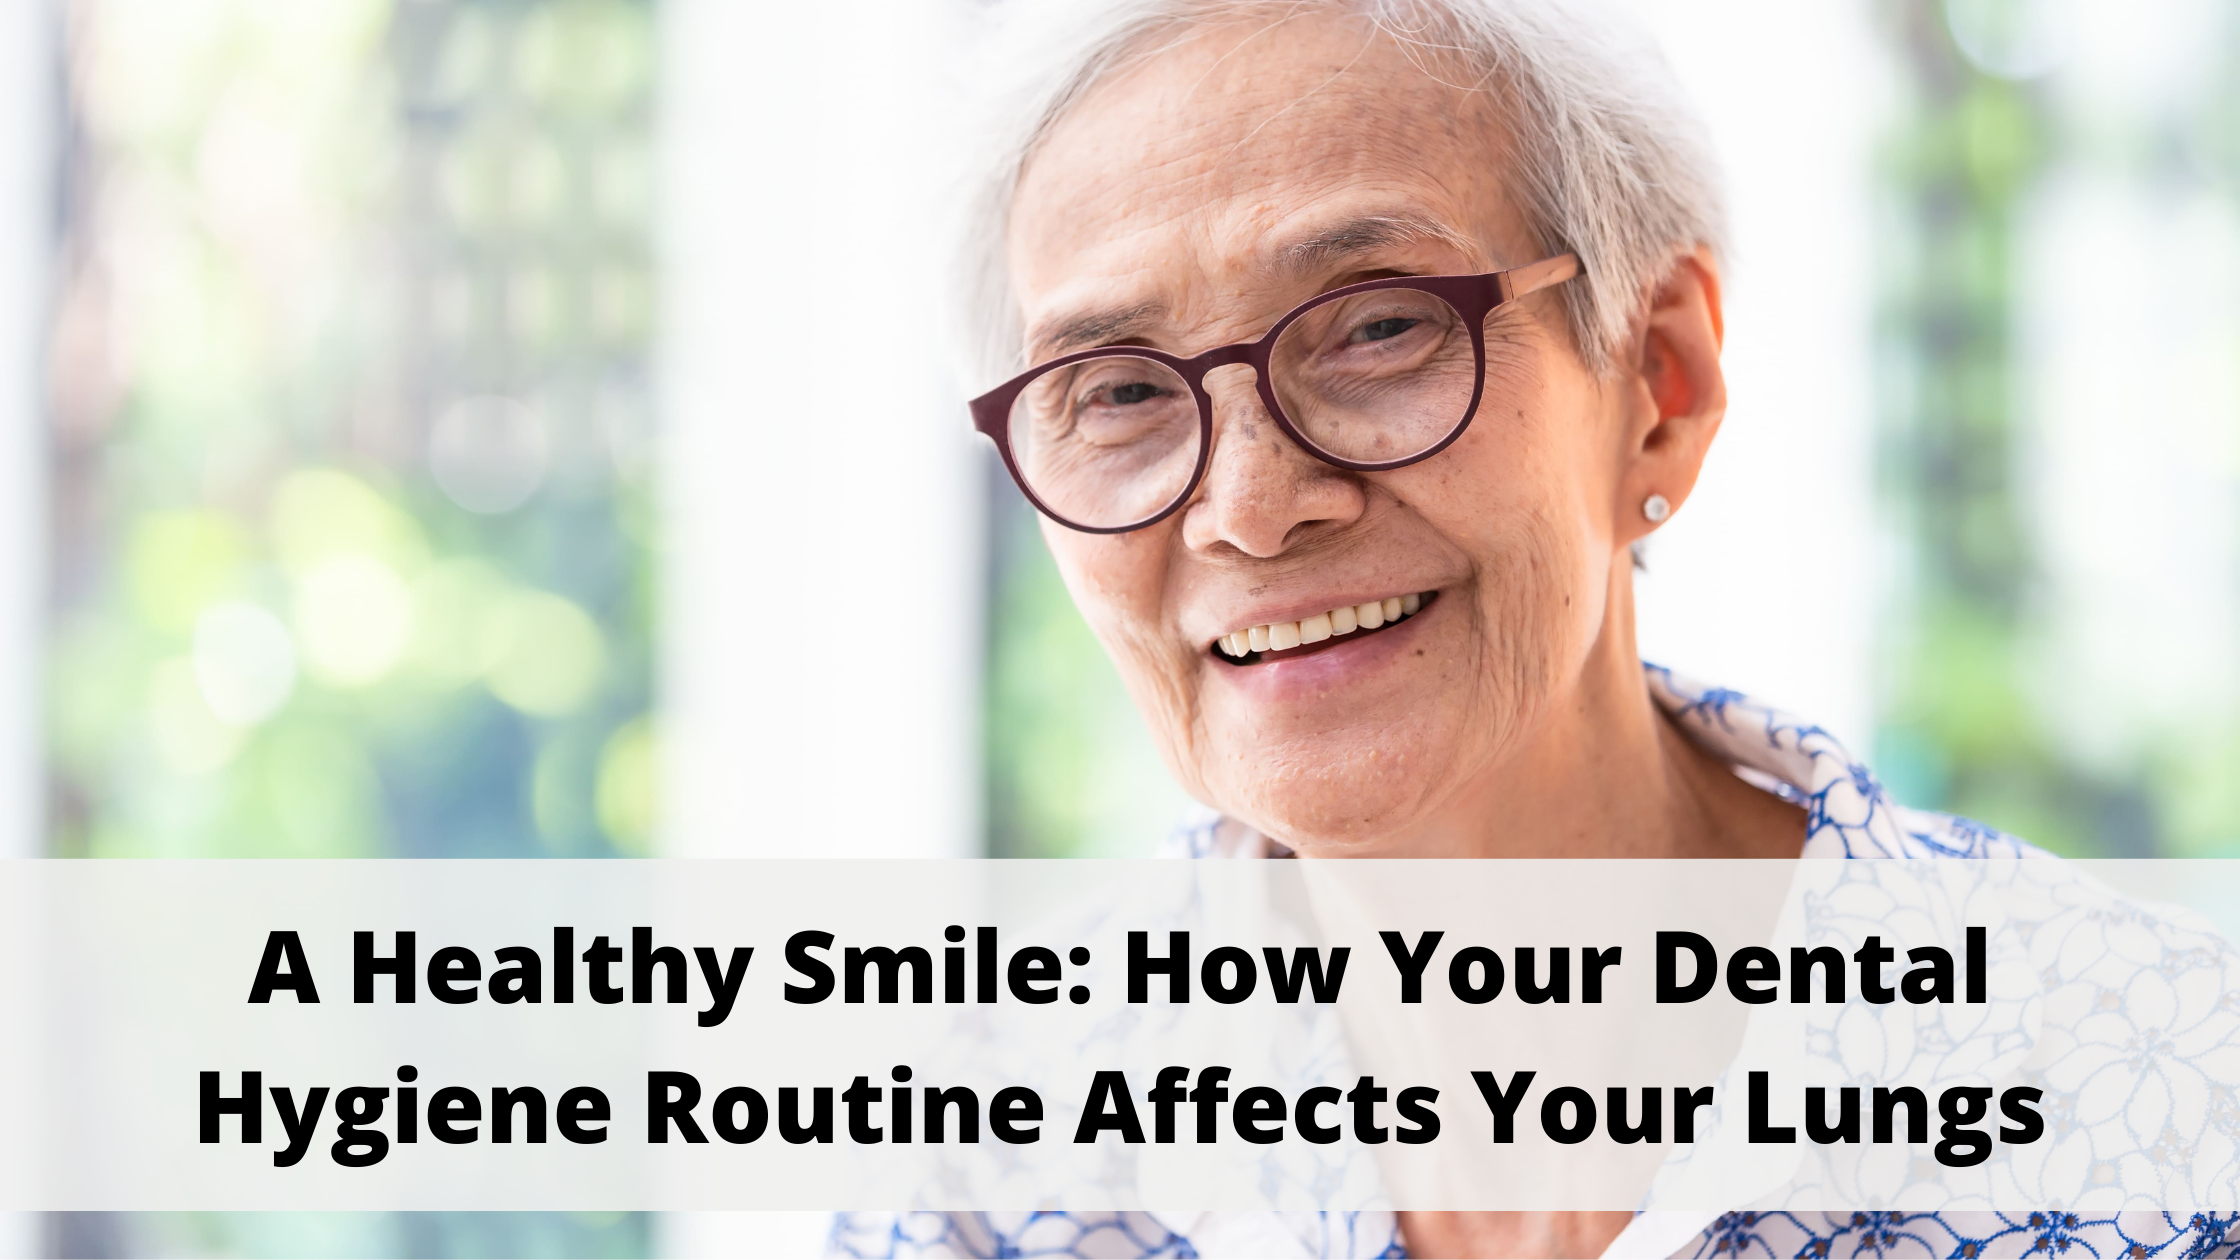 A Healthy Smile: How Your Dental Hygiene Routine Affects Your Lungs